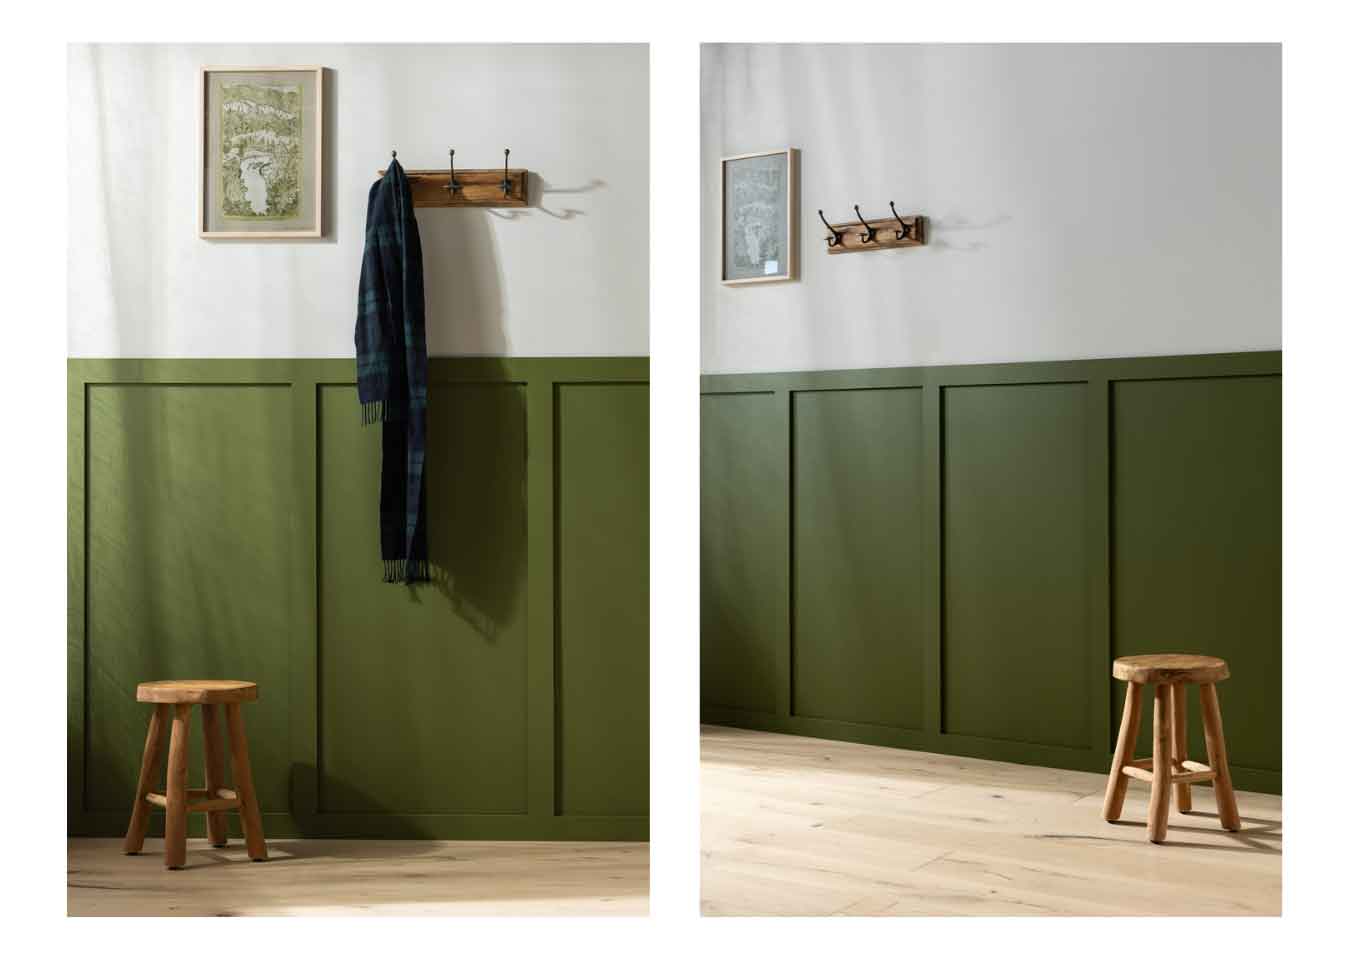 Left and right: Green half-height Shaker-style wall panelling with a wooden stool, coat hooks and an illustrated picture.